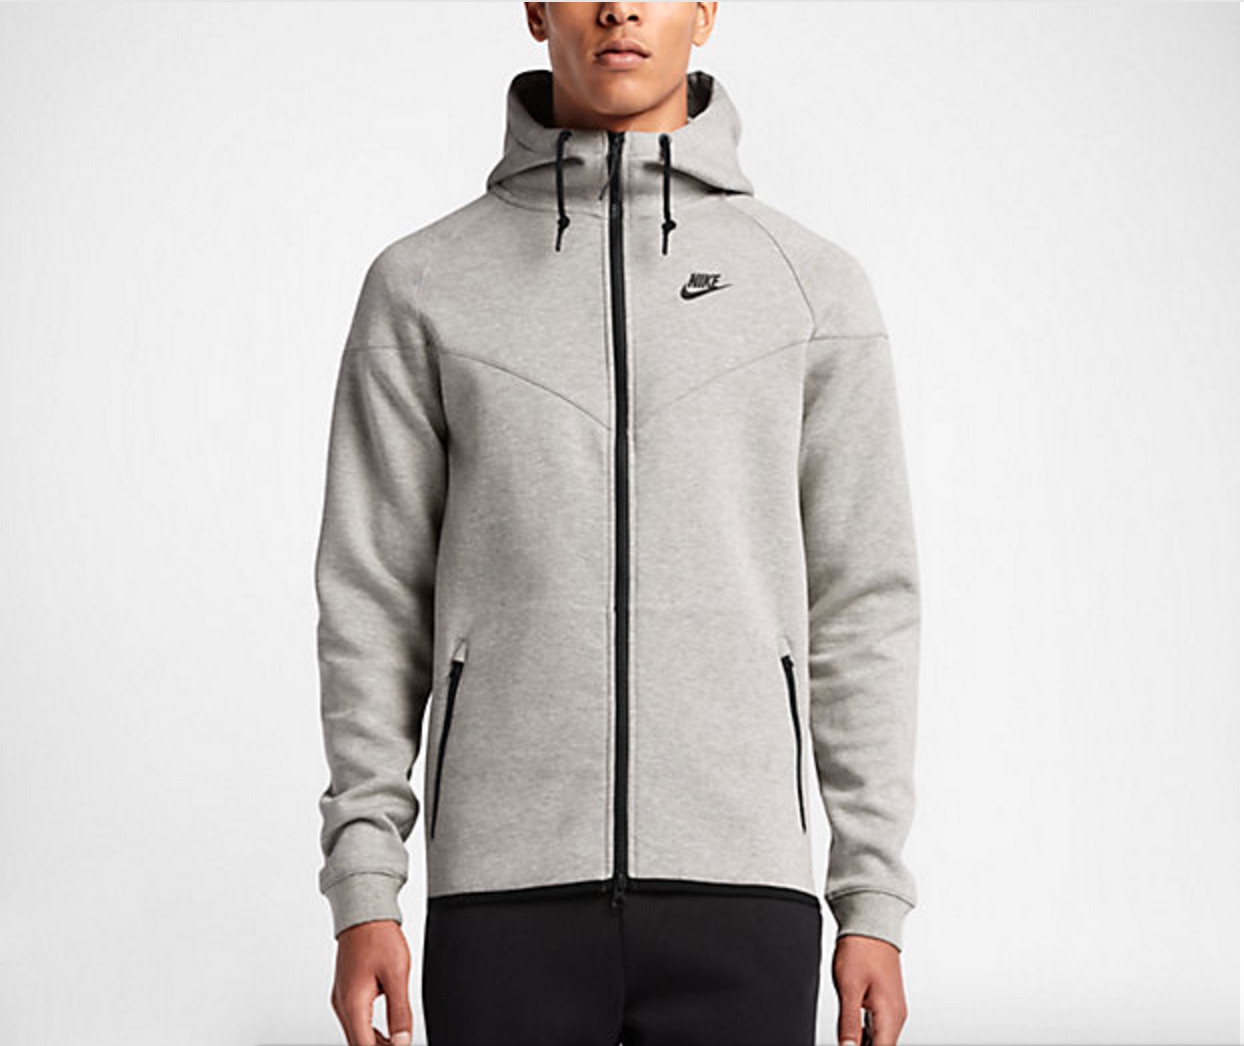 Get an Extra 20% off Nike Clearance Apparel and Shoes - NerdWallet